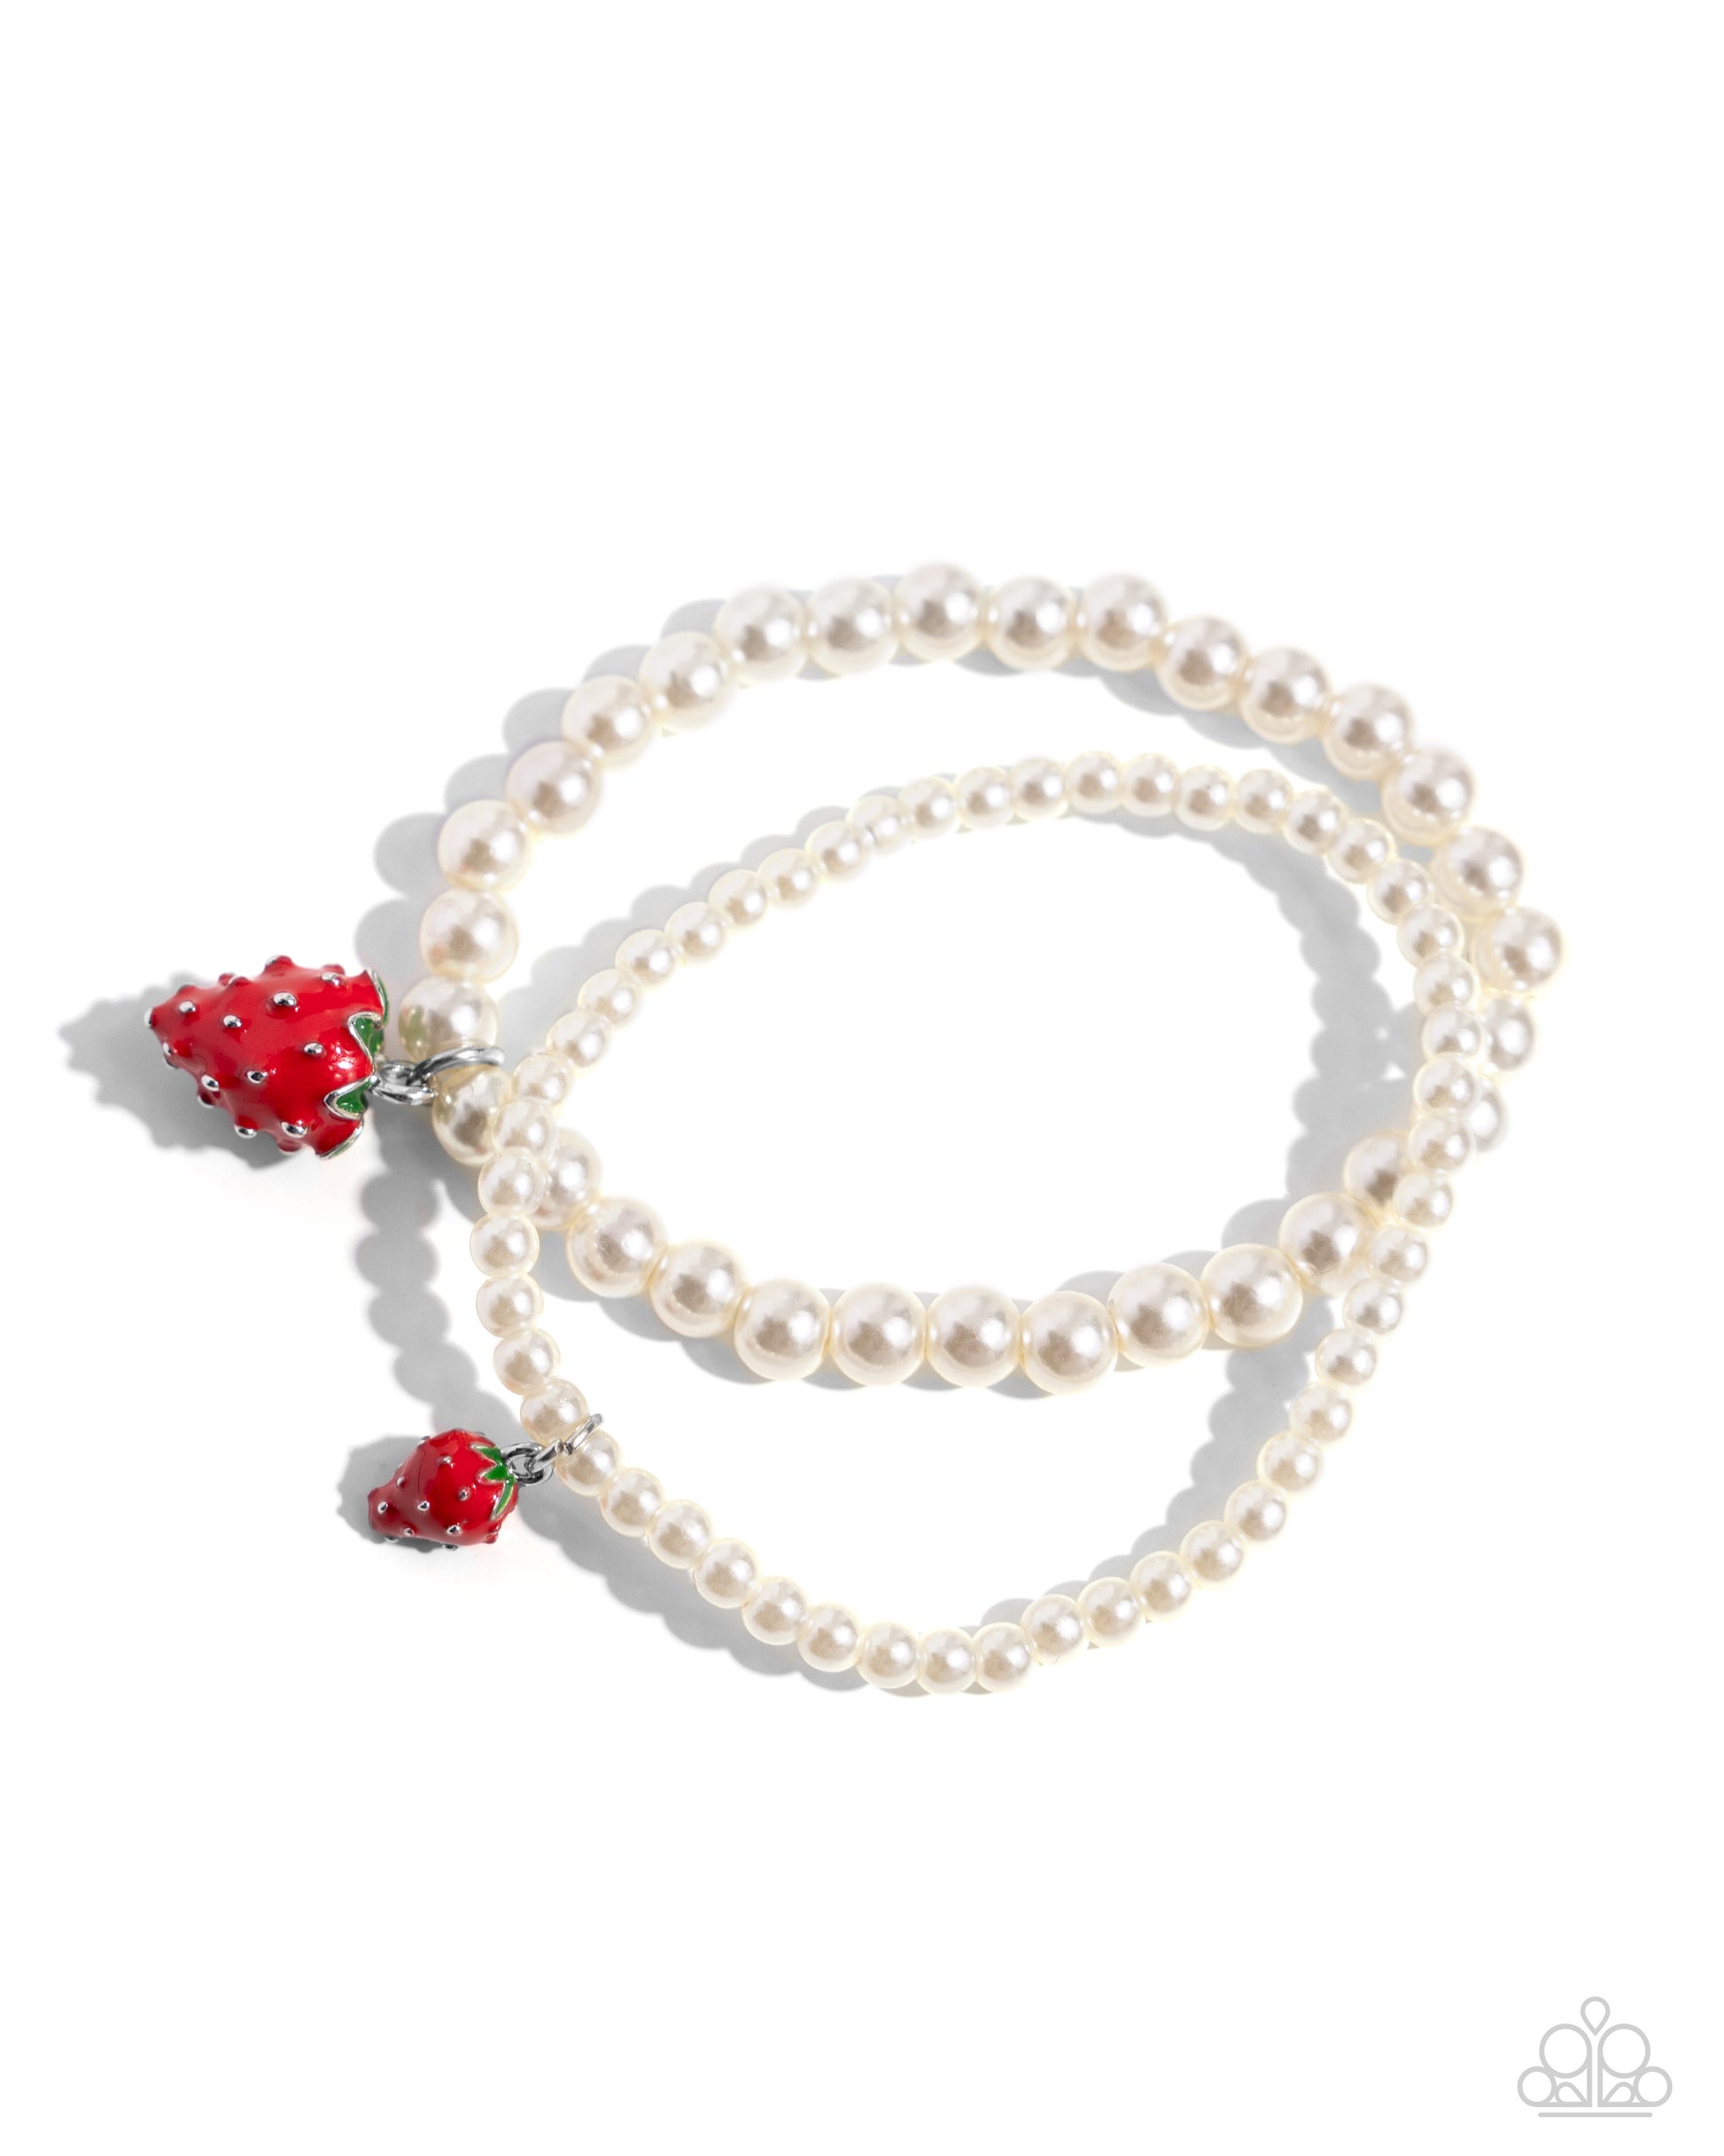 Strawberry Season Red Stretch Bracelet - Paparazzi Accessories Featuring tactile details, two red and green strawberries of various sizes dangle from two strands of gleaming white pearls also in various sizes for a sentimentally sweet statement around the wrist. Sold as one set of two individual bracelets. P9SE-RDXX-298XX